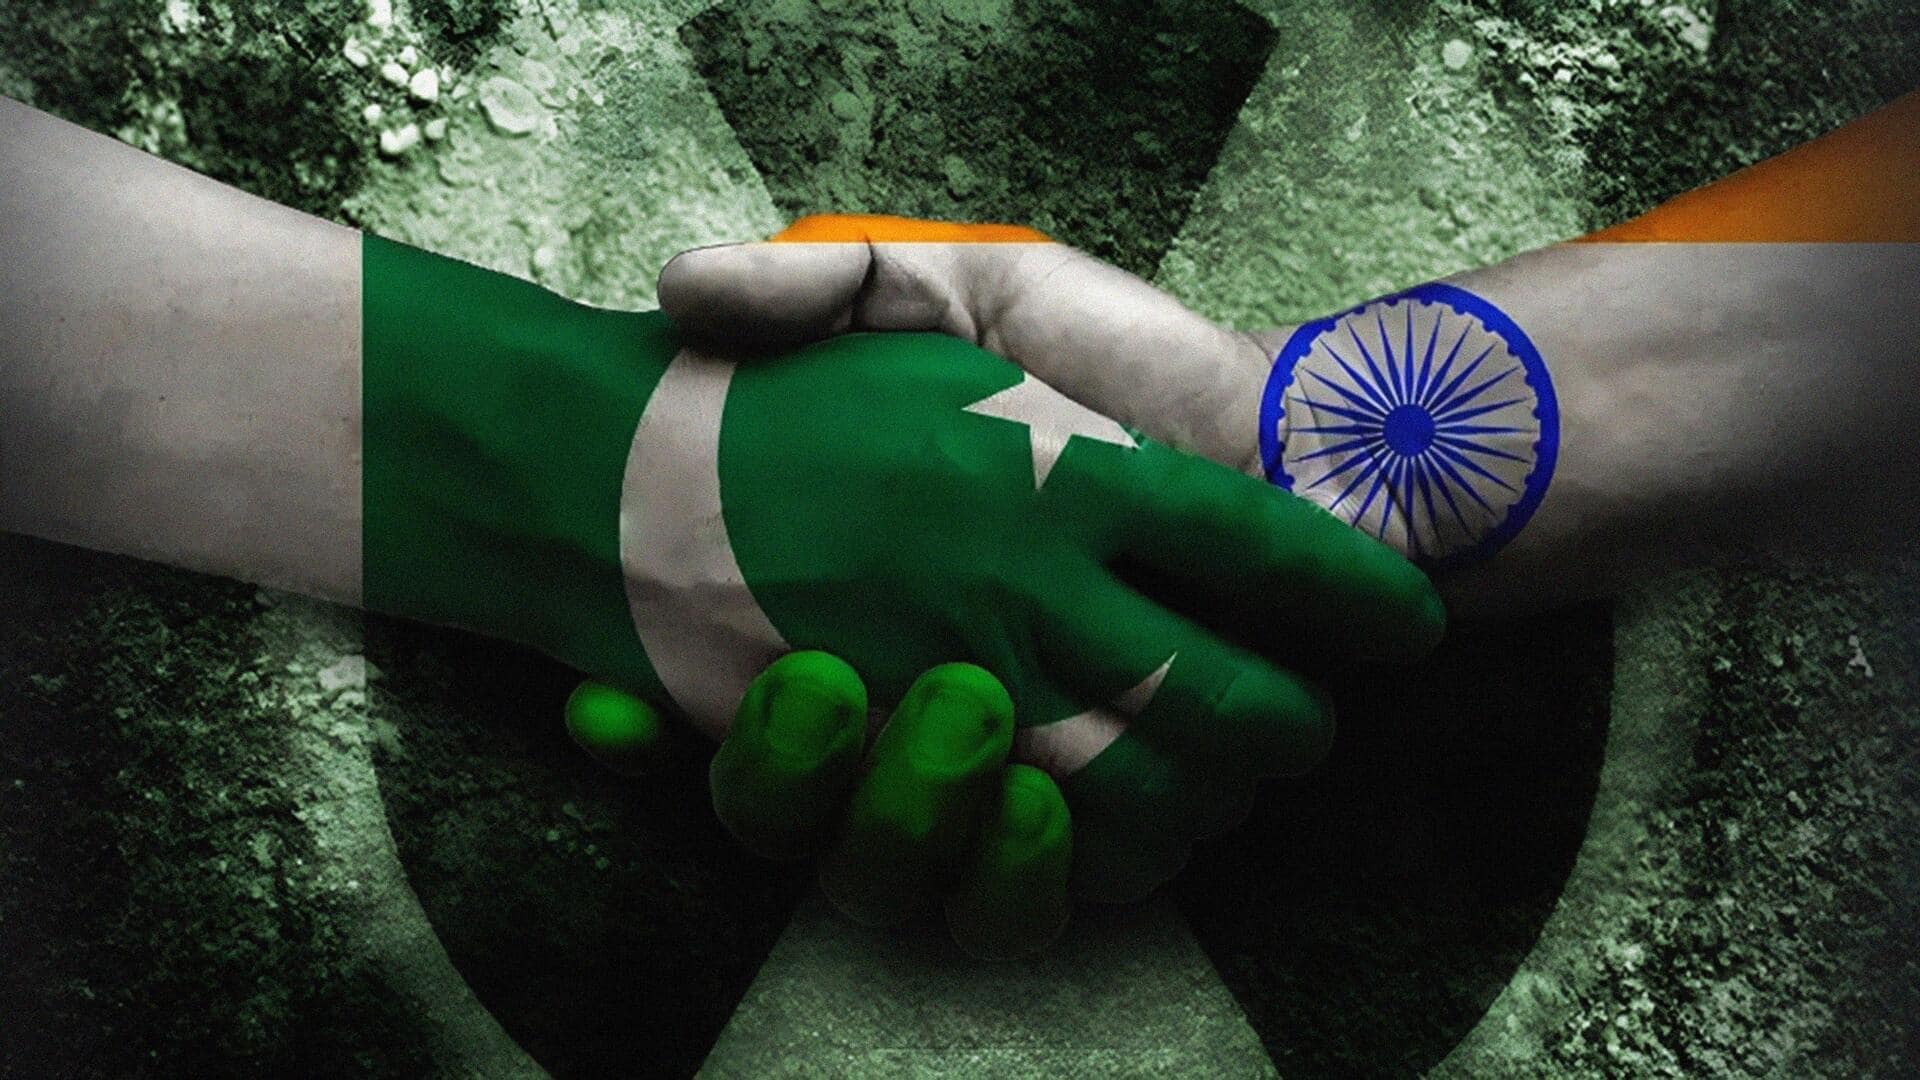 India, Pakistan exchange list of nuclear installations, facilities